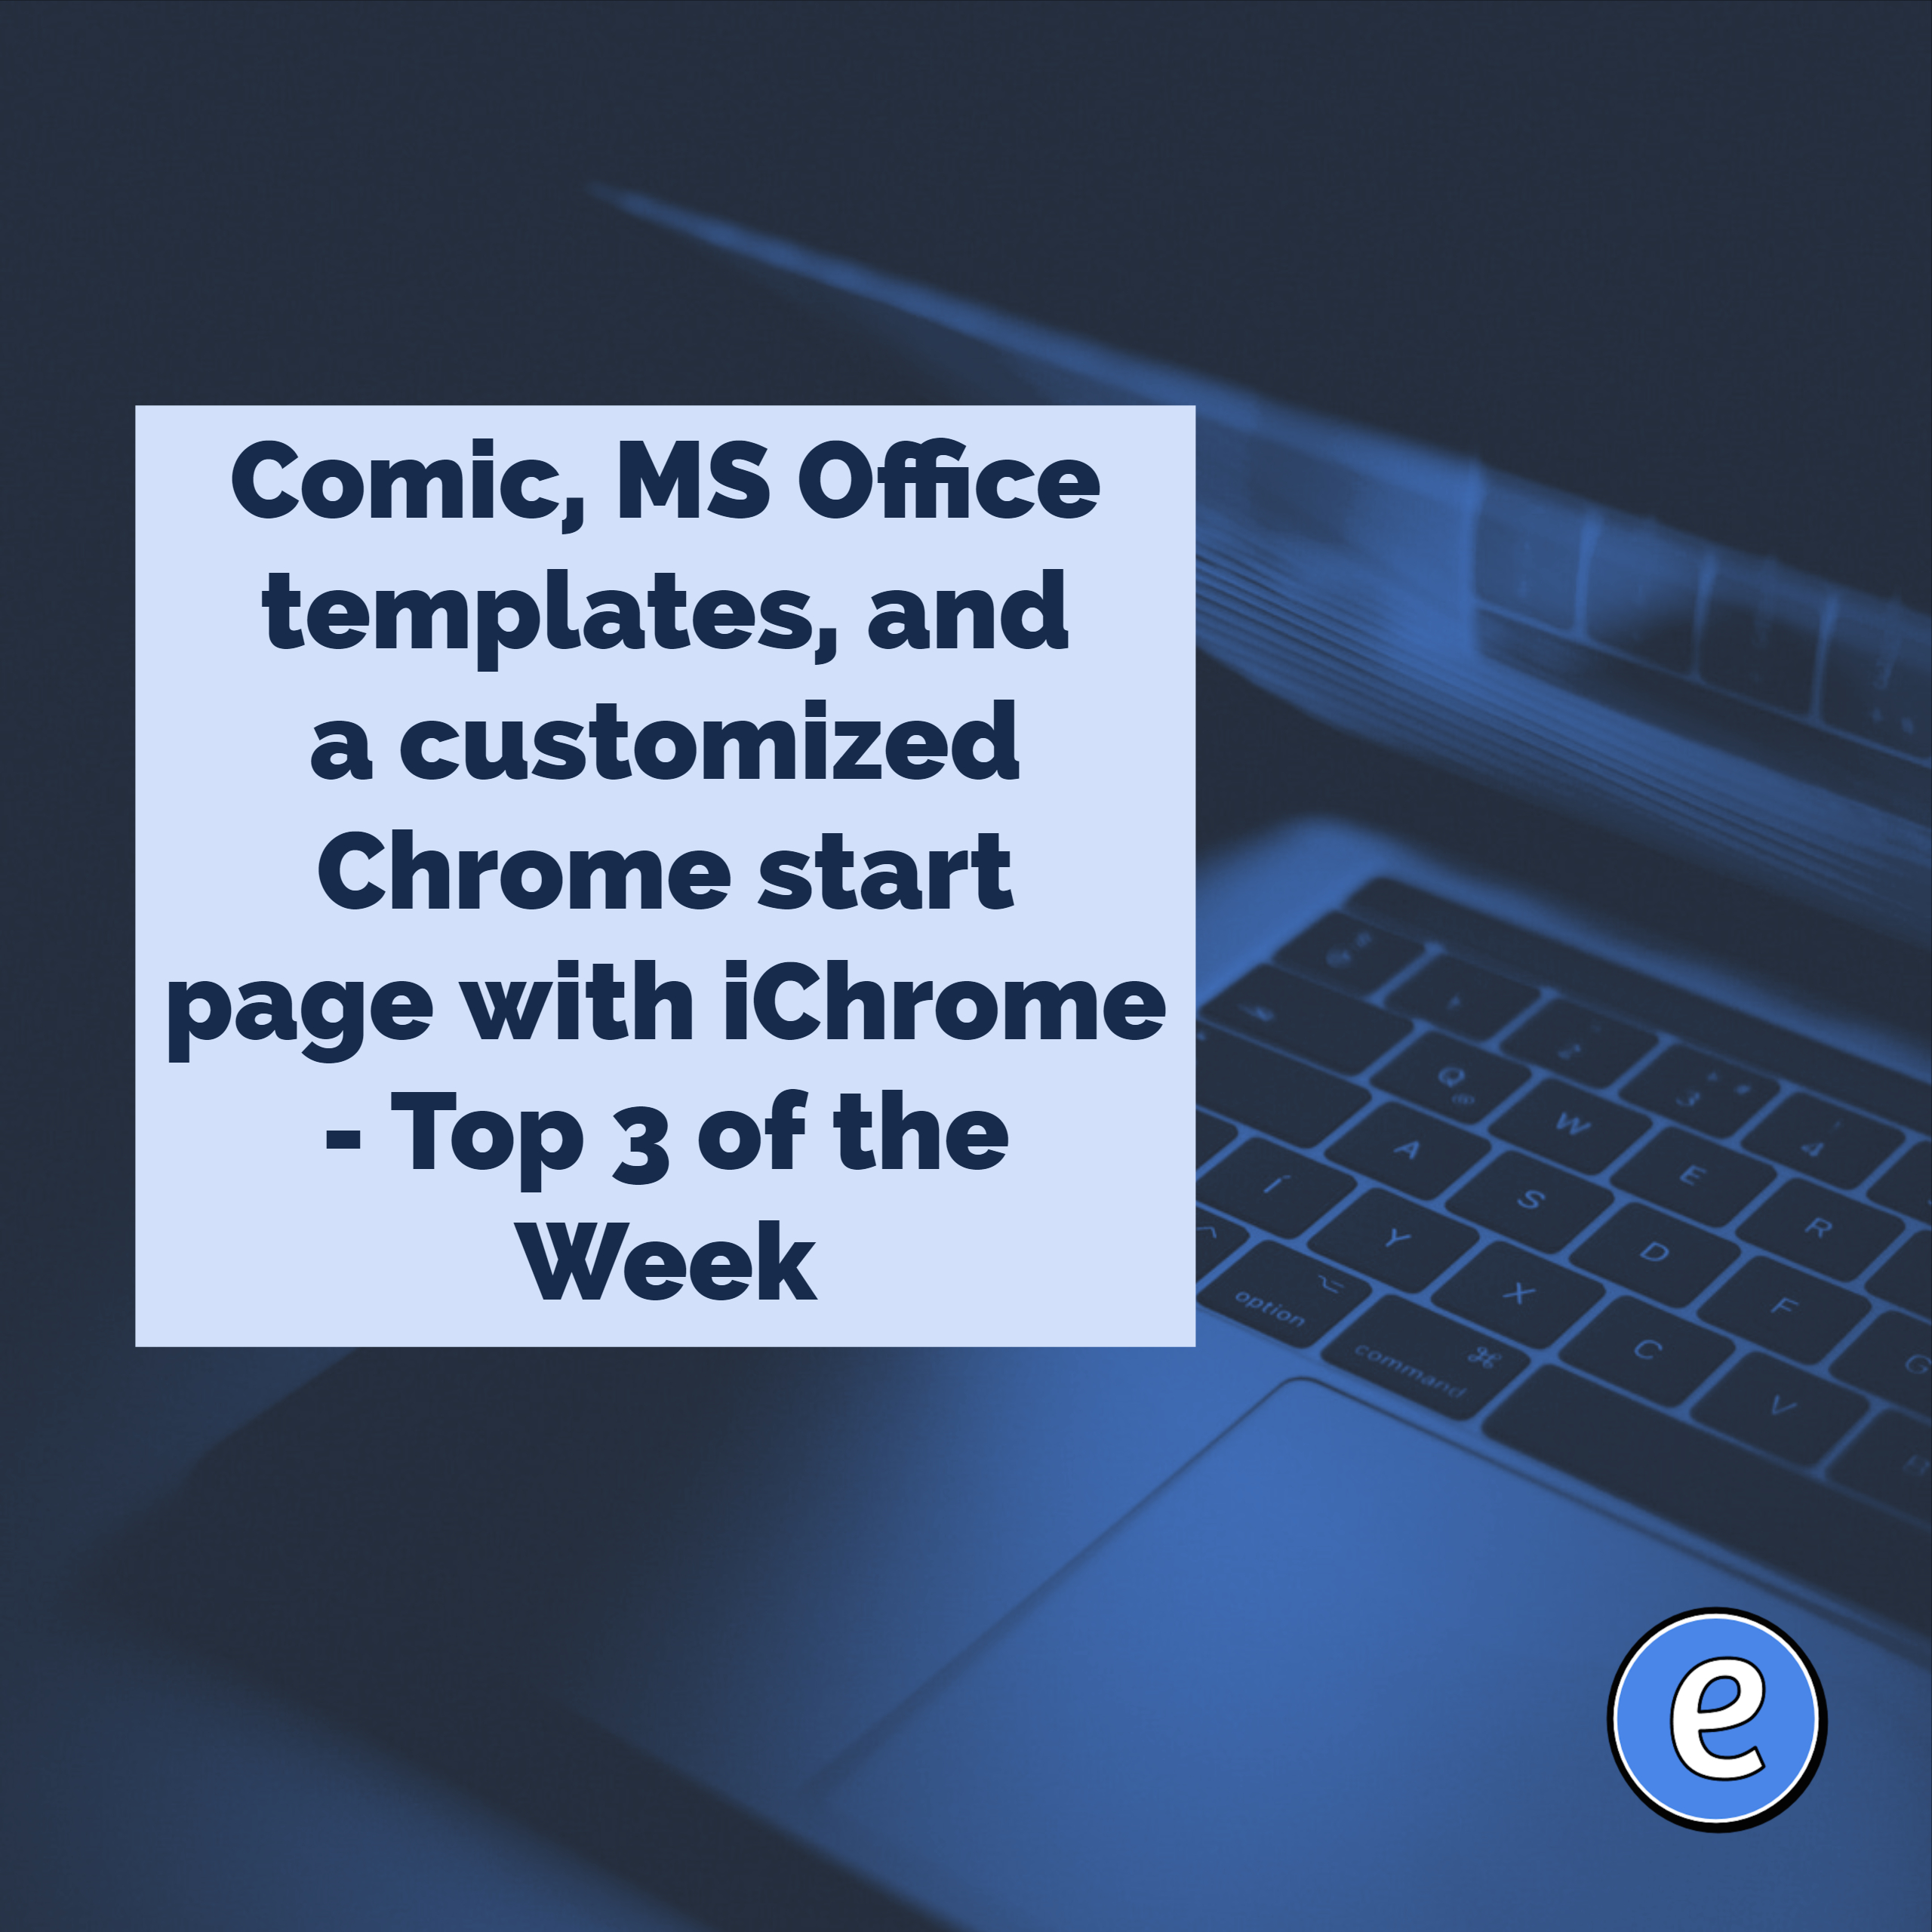 Comic, MS Office templates, and a customized Chrome start page with iChrome – Top 3 of the Week